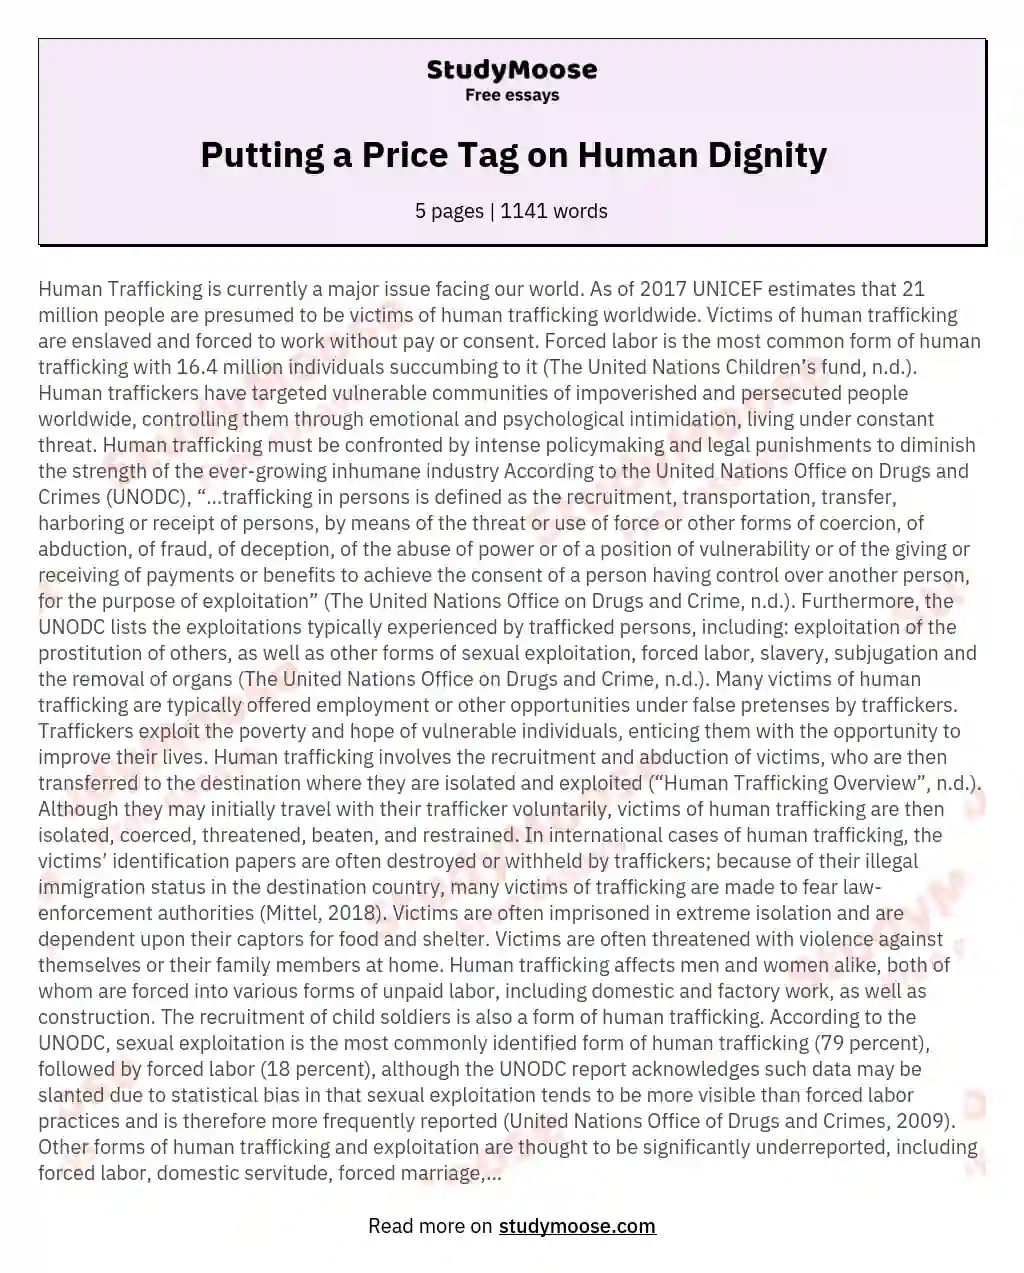 Putting a Price Tag on Human Dignity essay